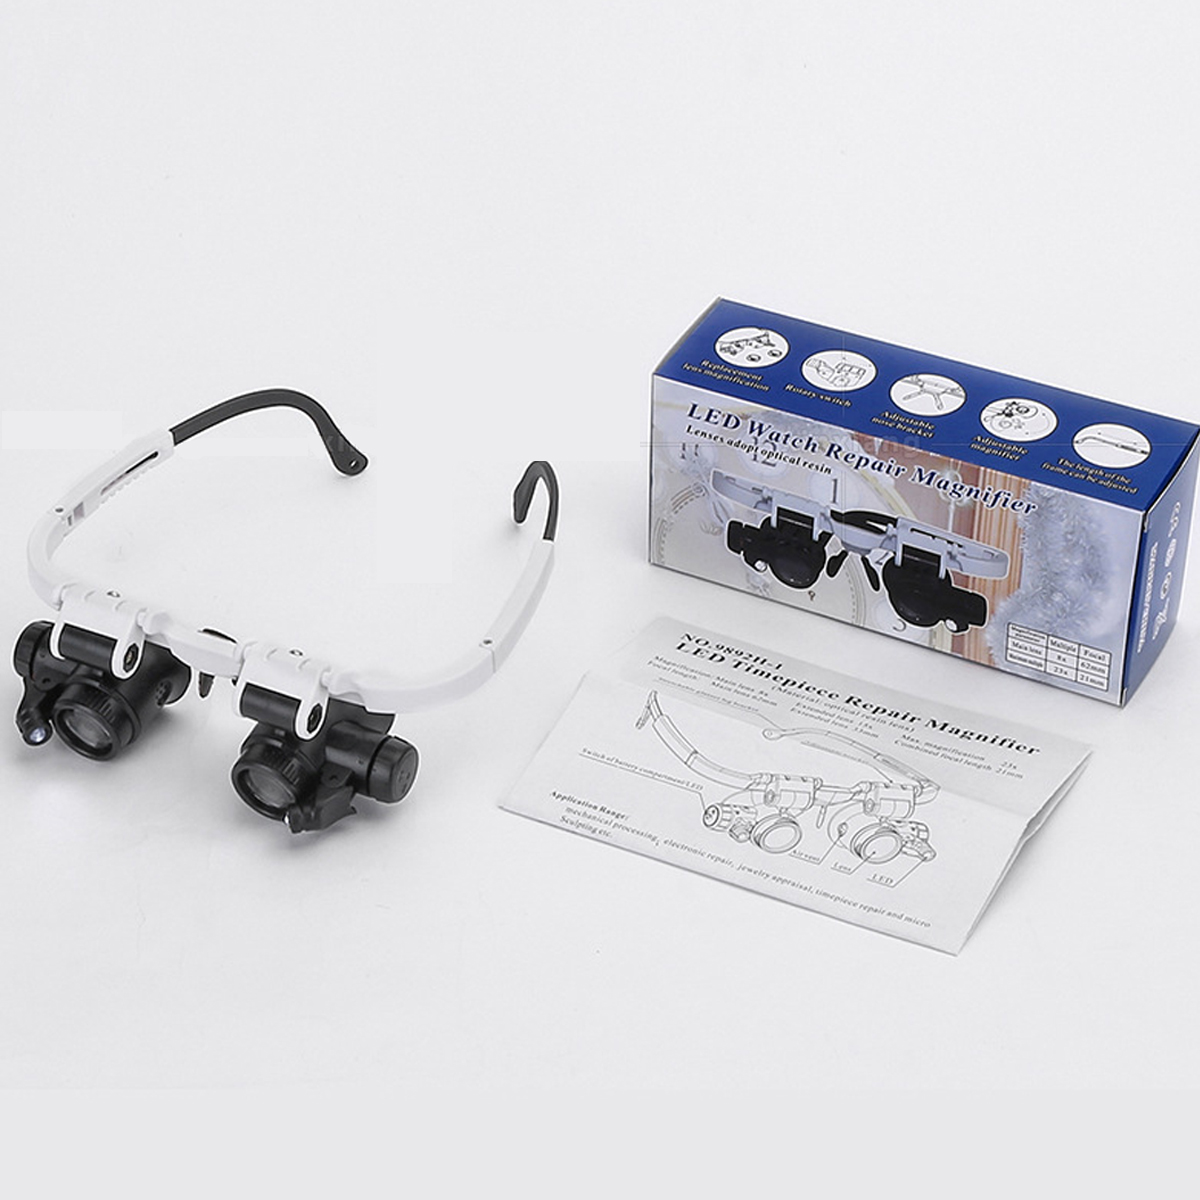 Headband-Head-Mounted-Repair-LED-Lamp-Light-Magnifying-Glass-Magnifier-Loupe-1623754-10